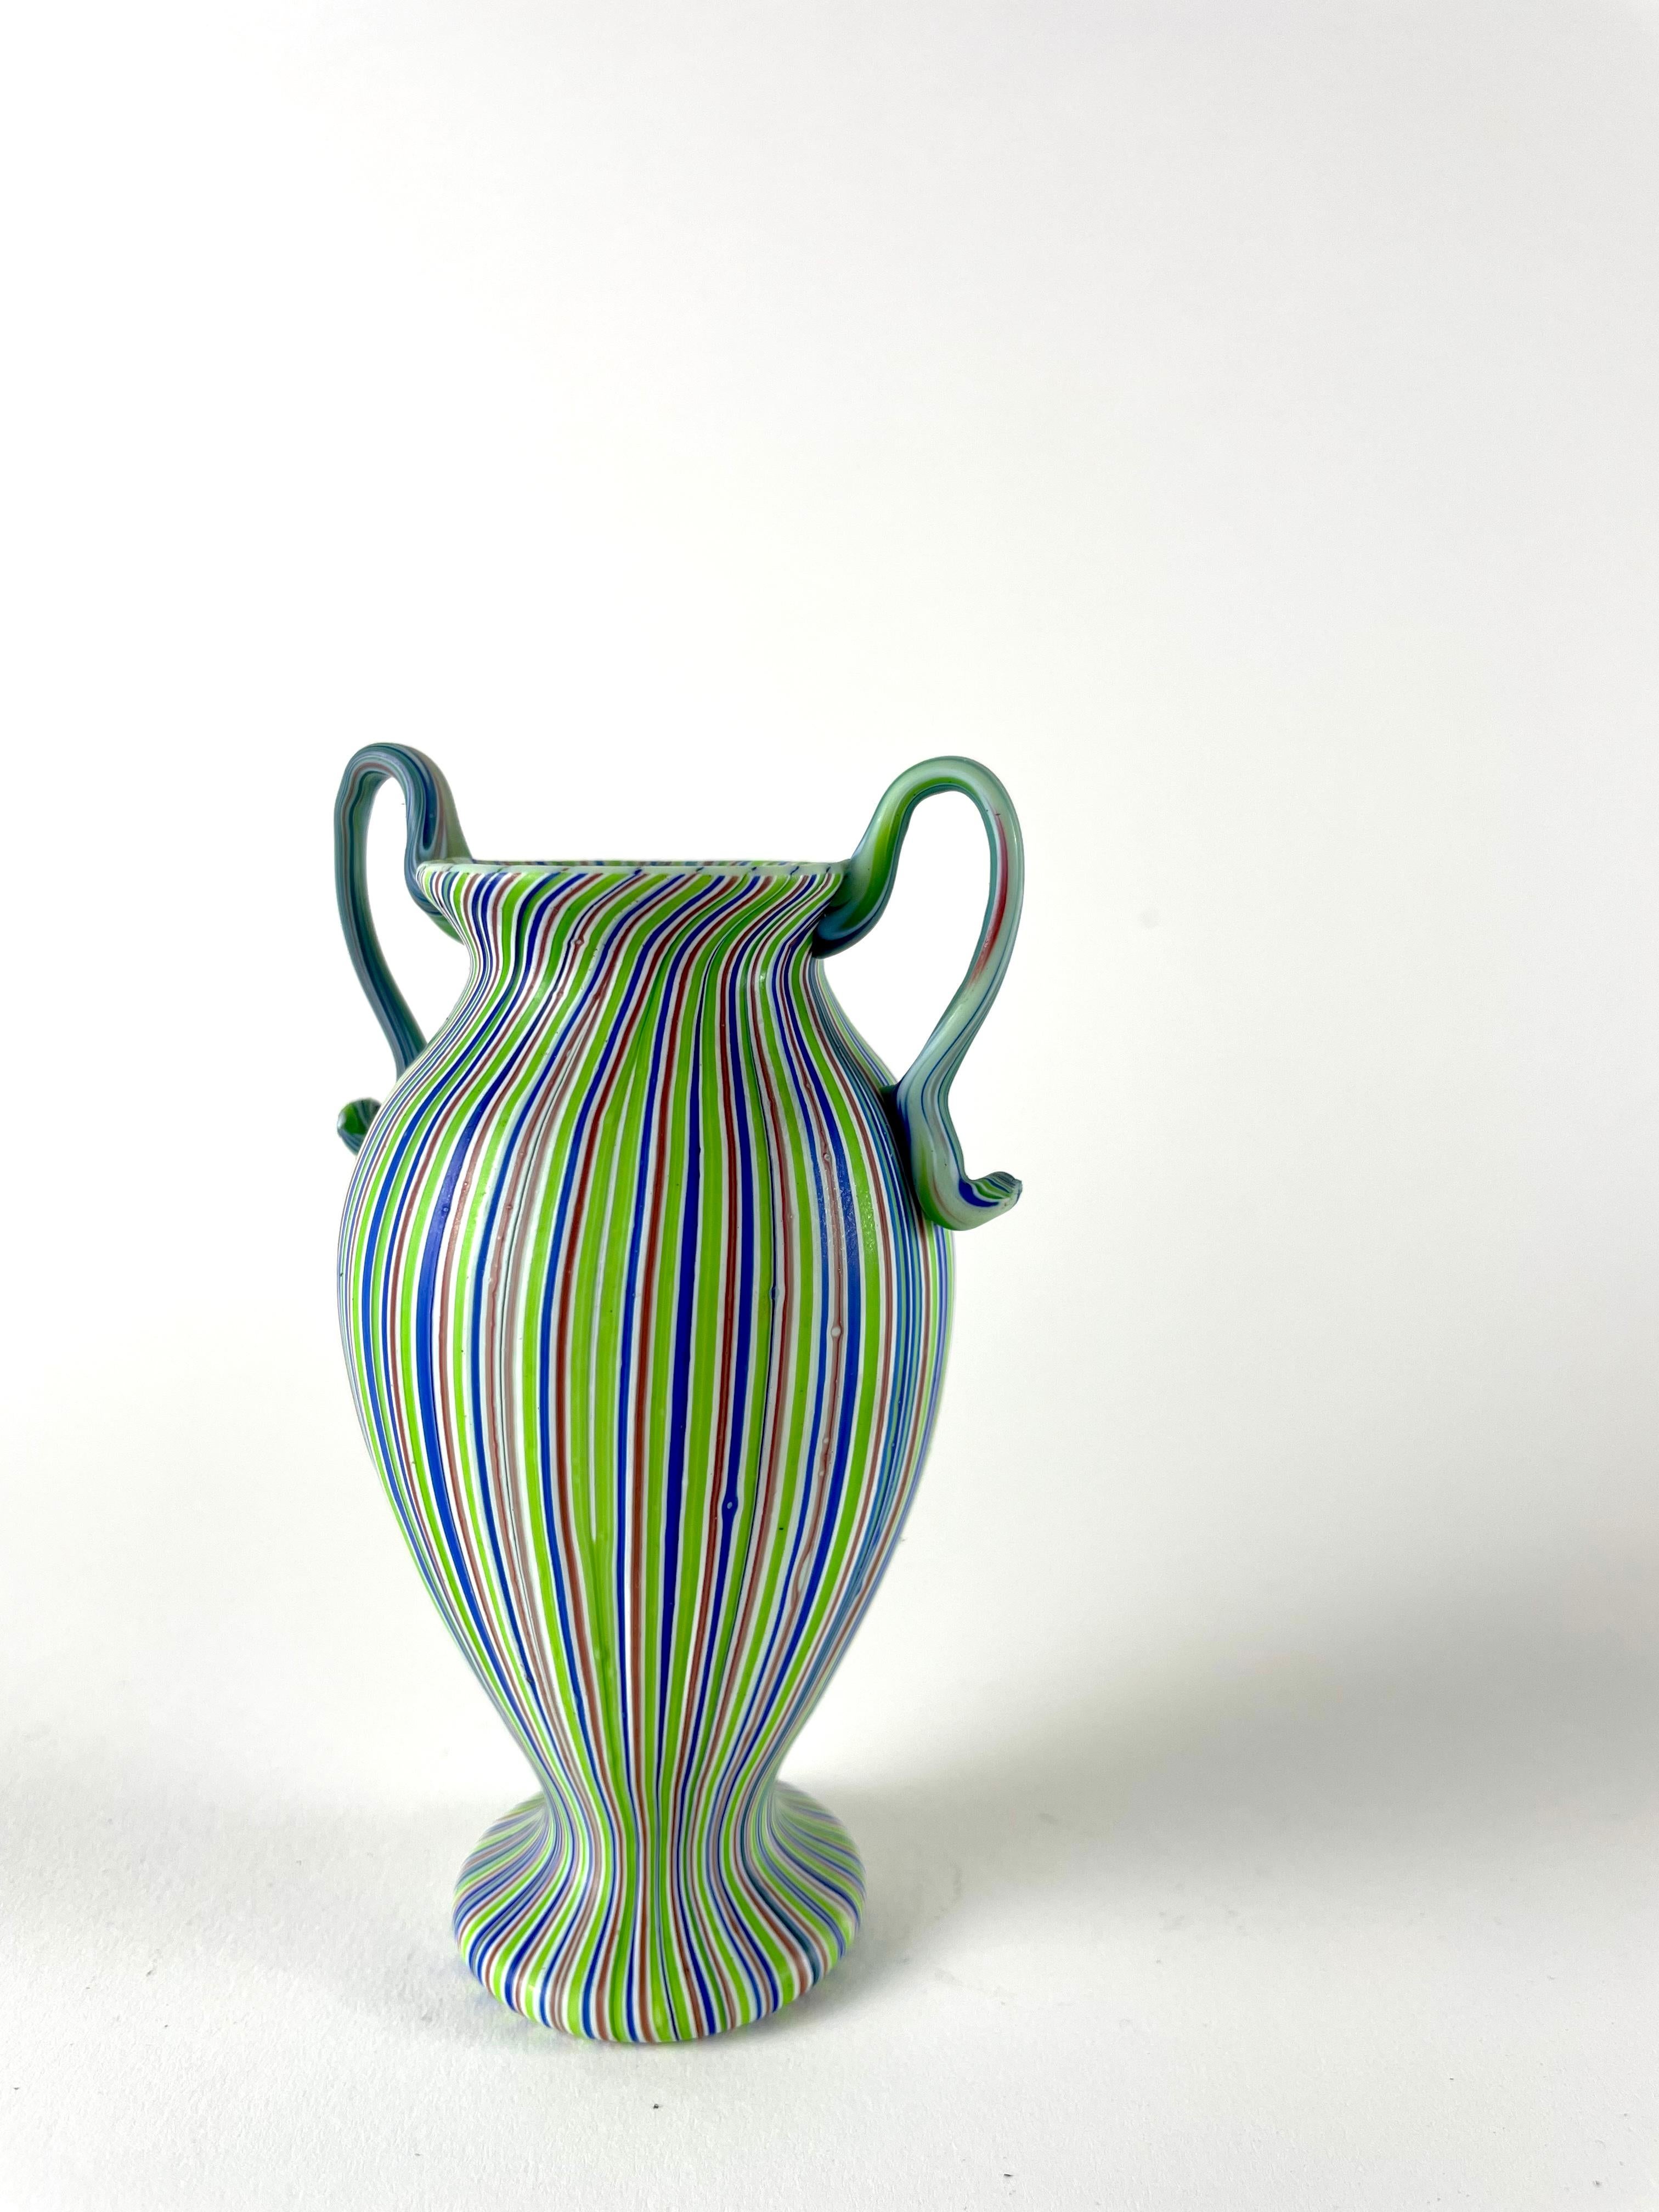 Introducing the Vaso a canne, a small treasure that embodies the incredible craftsmanship of Murano. This exquisite vase is meticulously handcrafted using a unique technique, with small glass canes arranged in a regular and symmetric pattern. The